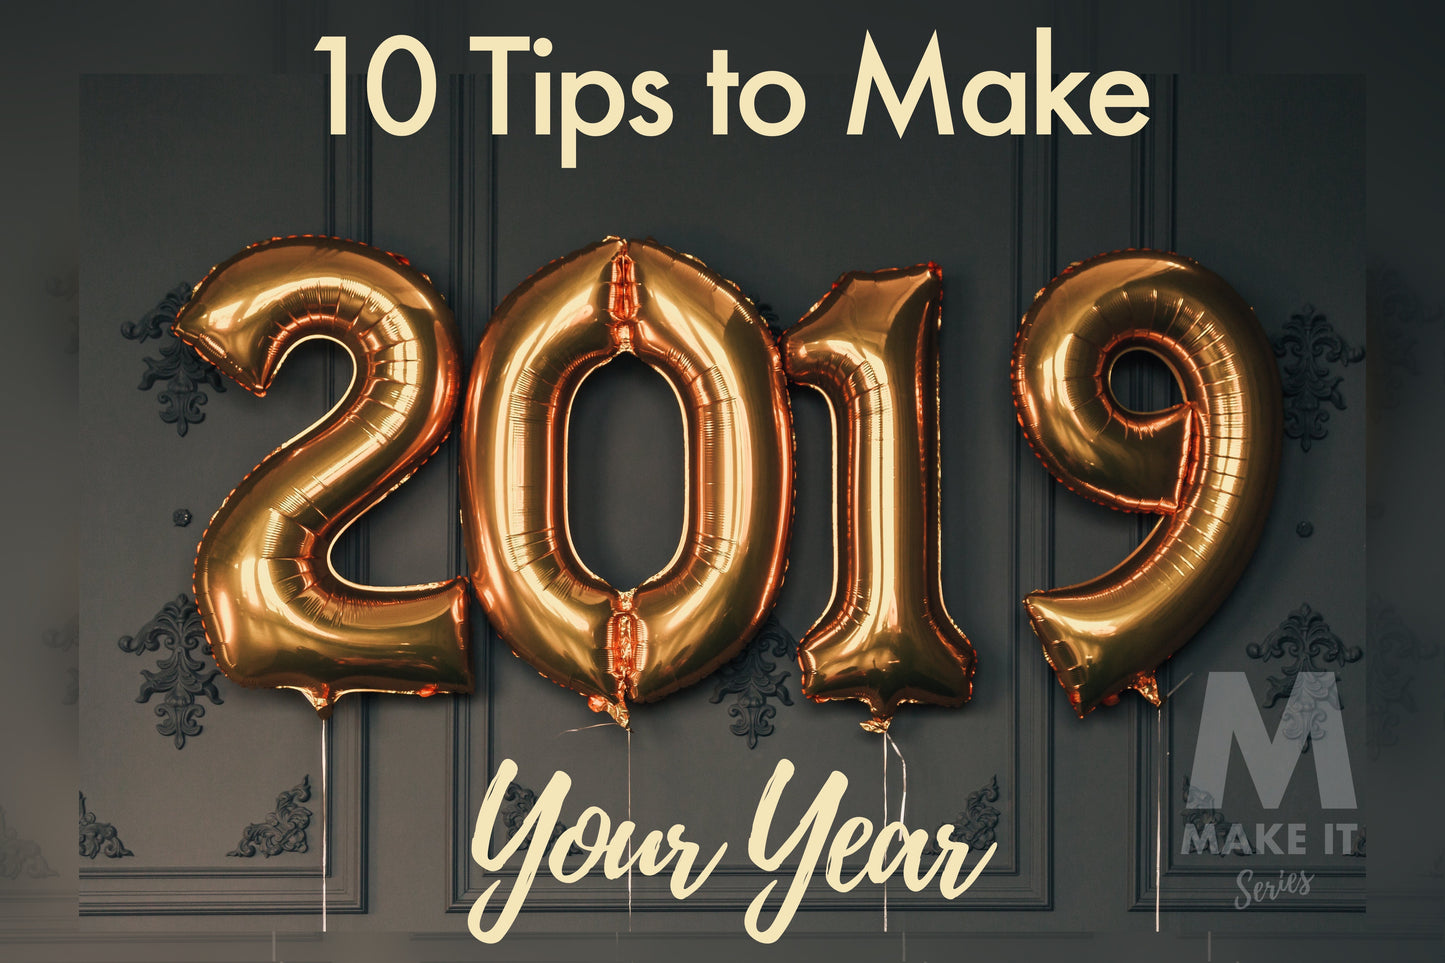 10 Tips to Make 2019 Your Year